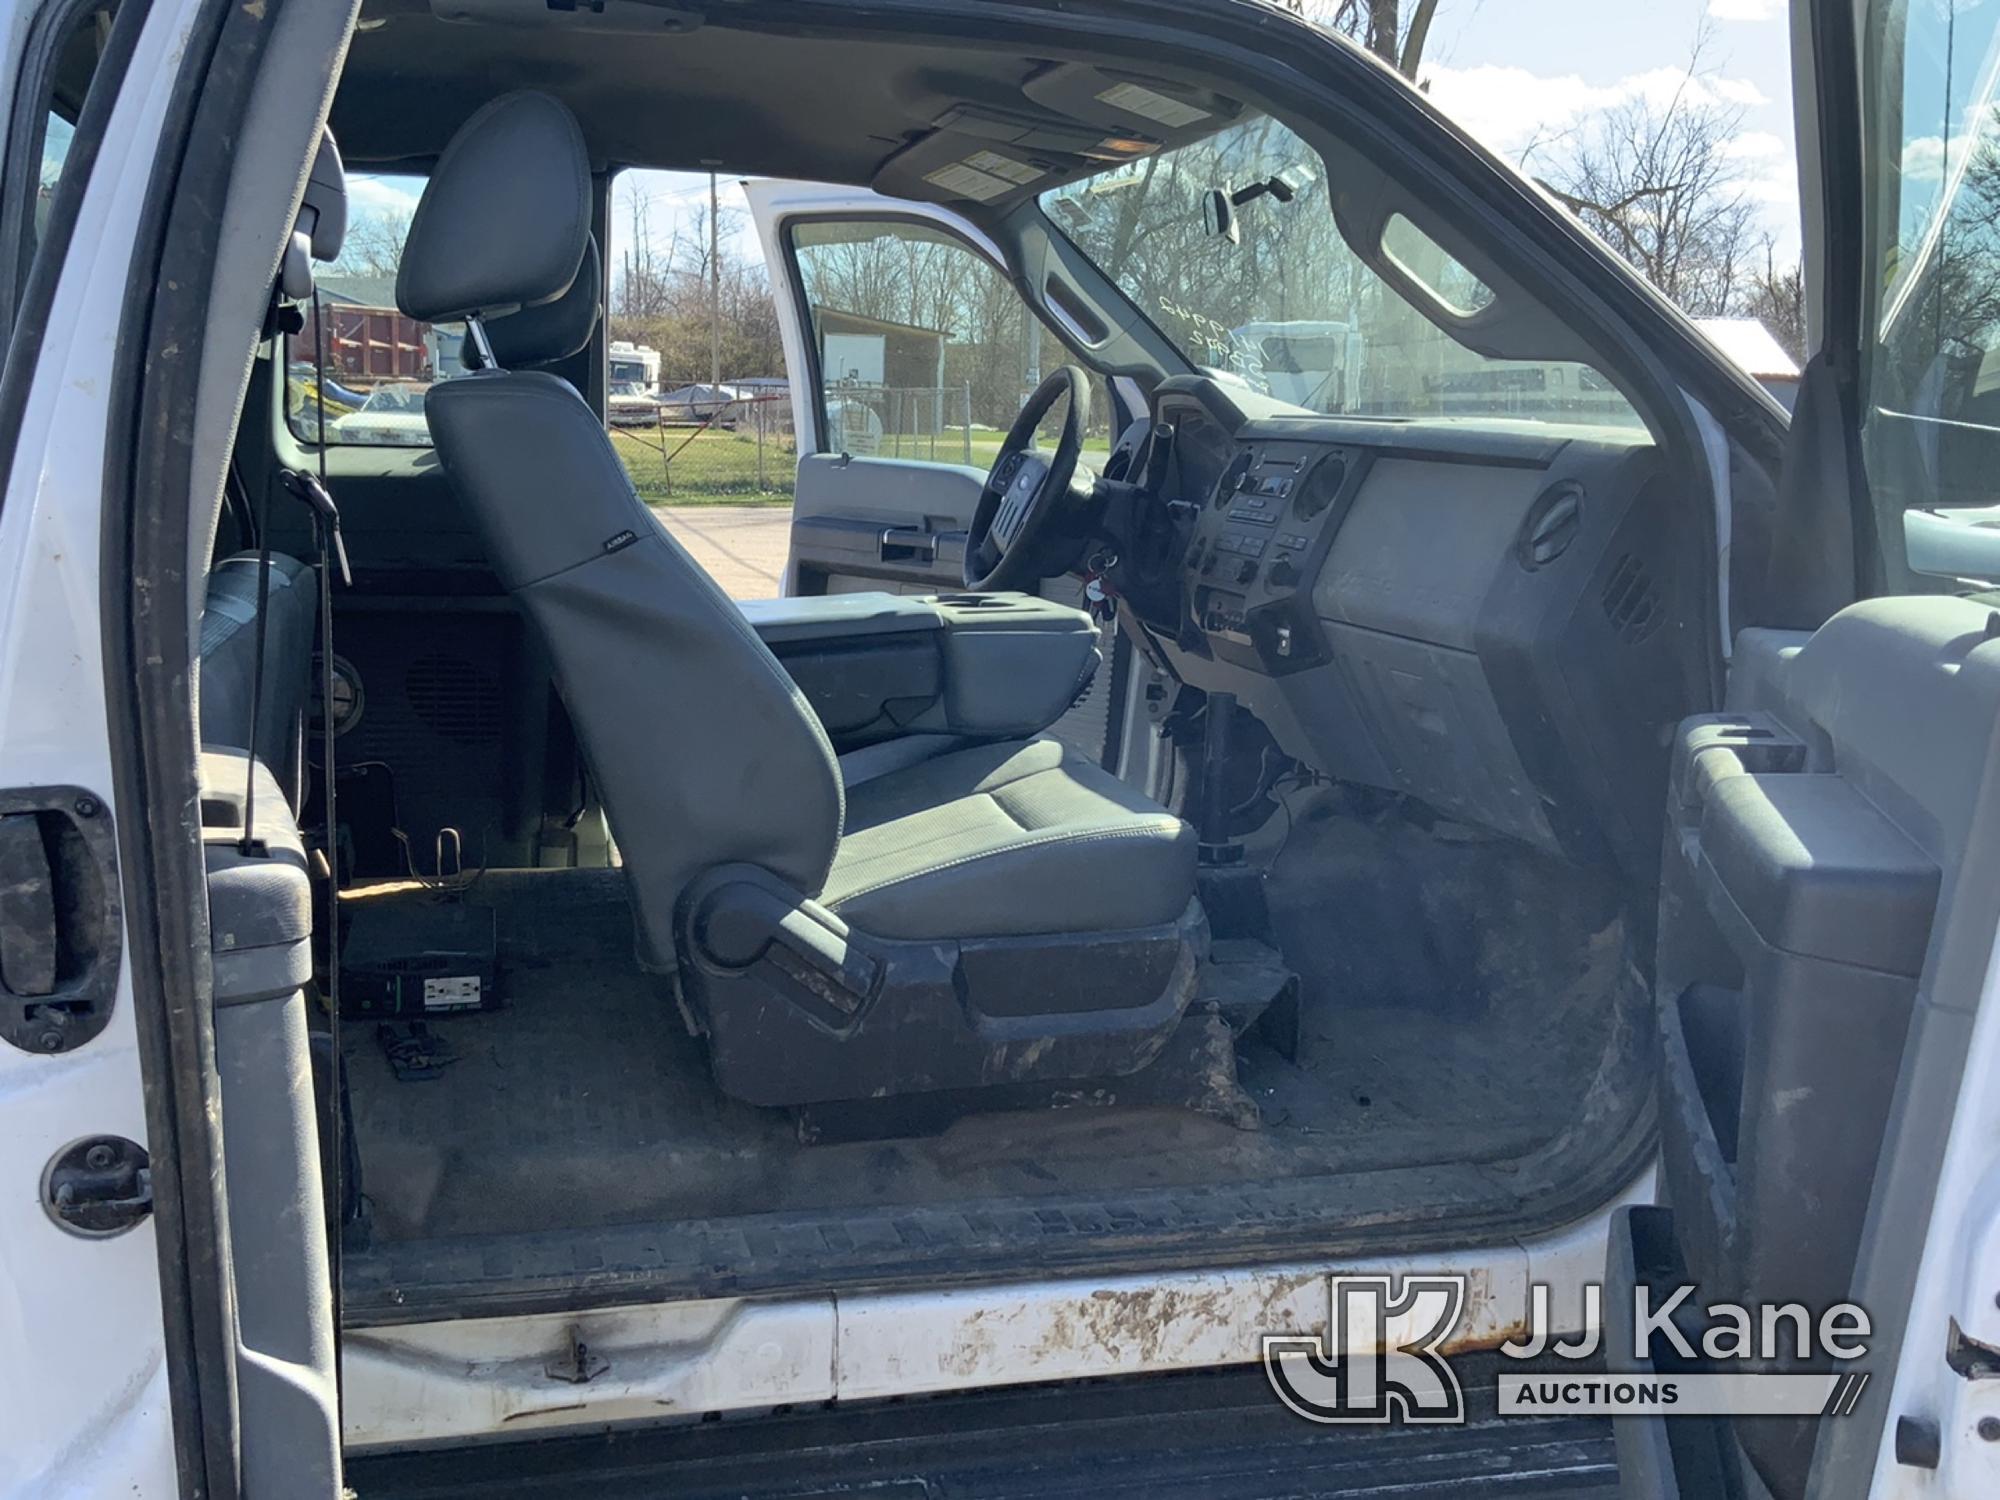 (South Beloit, IL) 2013 Ford F250 4x4 Extended-Cab Pickup Truck Runs & Moves) (Body Damage, Rust Dam